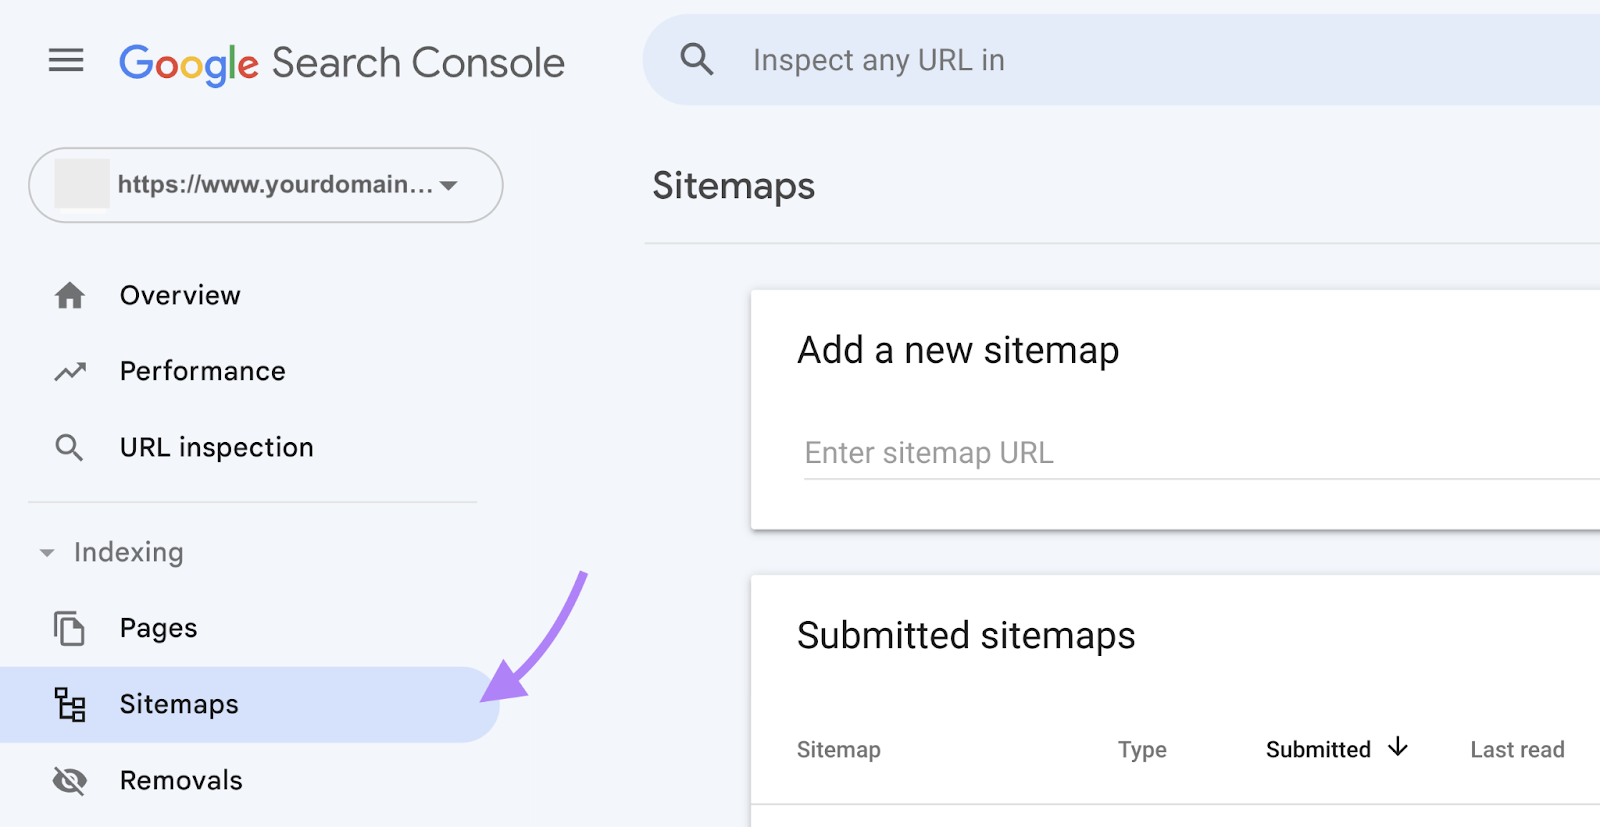 navigate to “Sitemaps” report